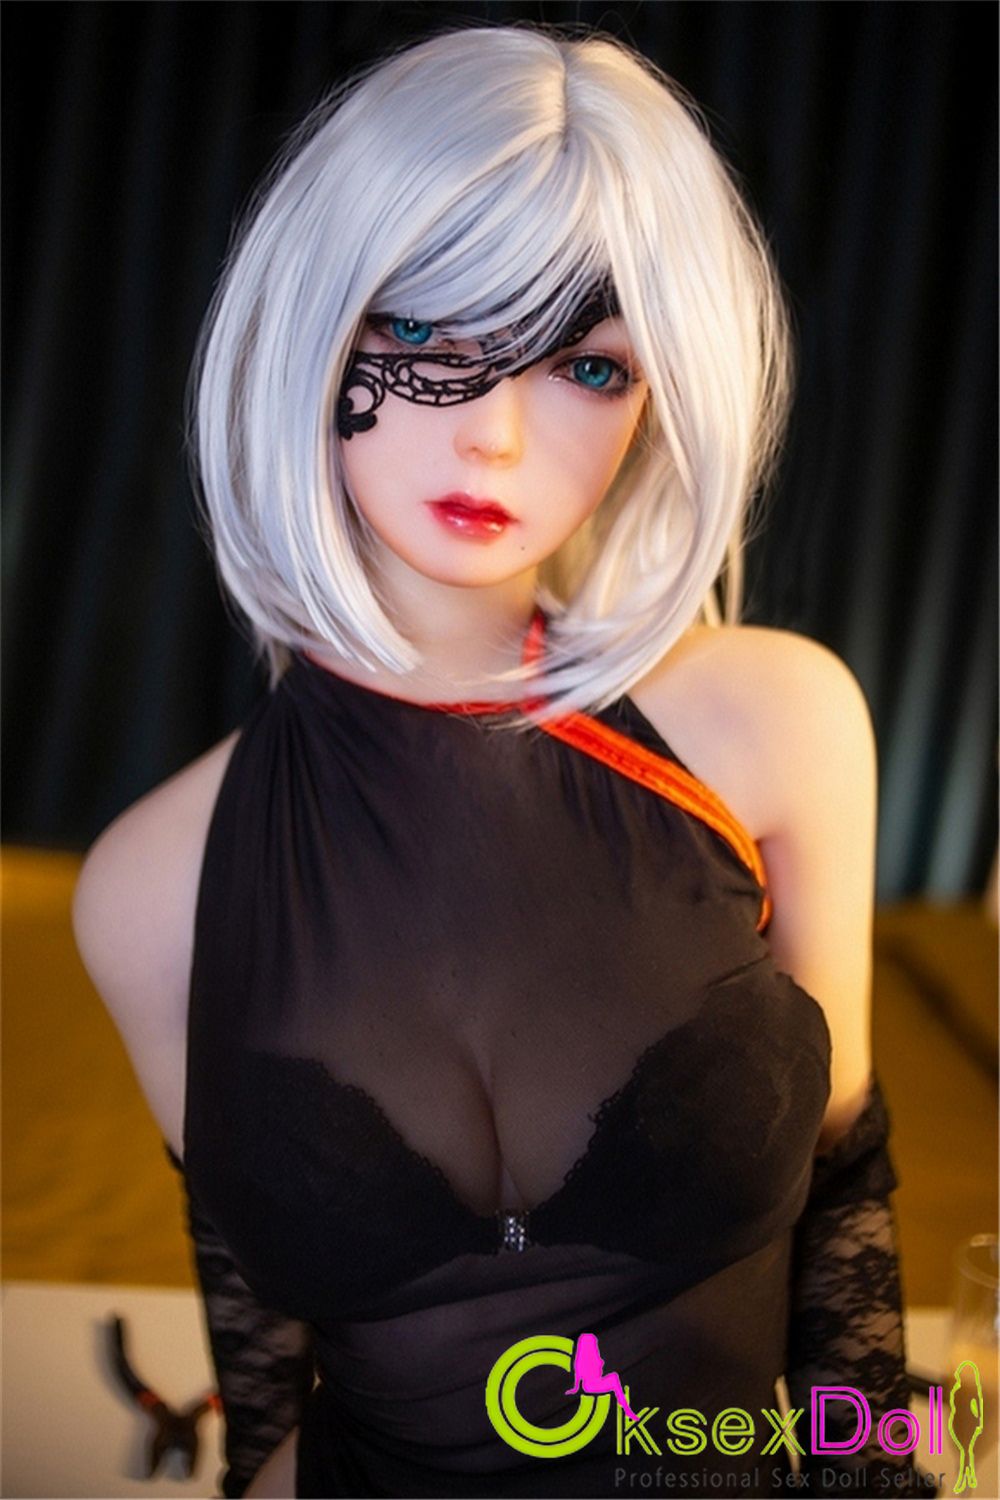 Huge Boobs Real Sex Doll images